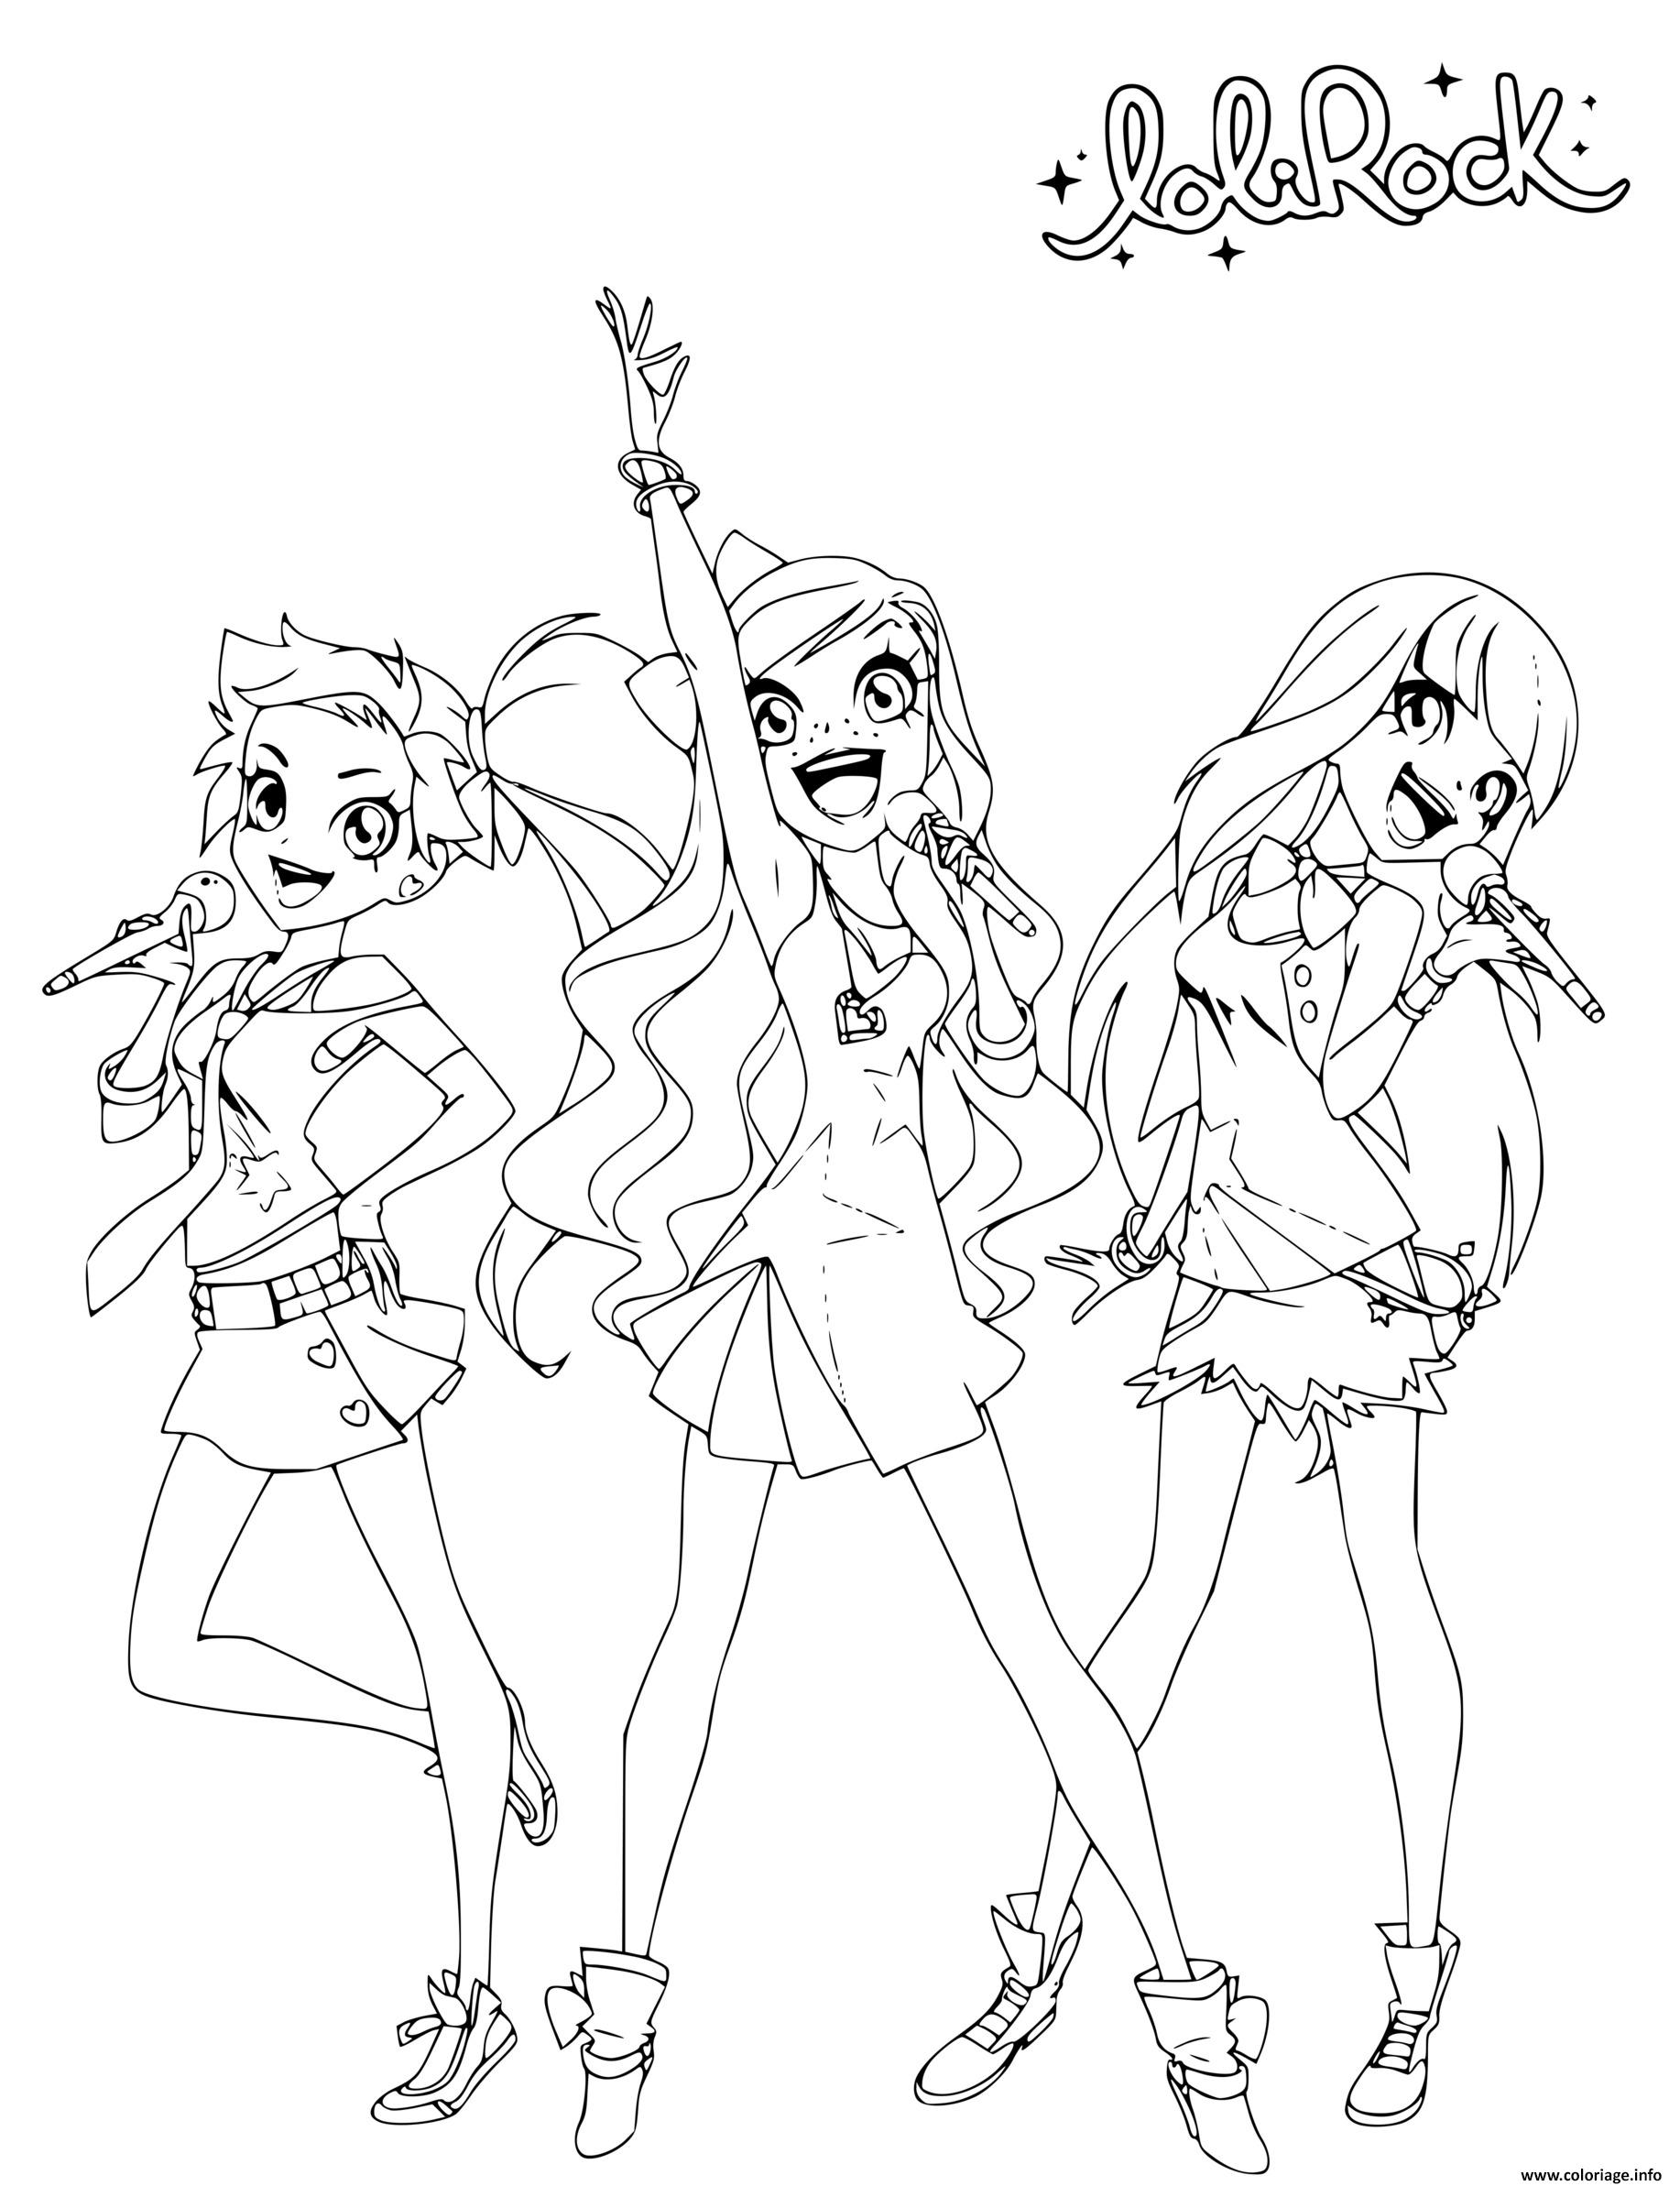 ️Lolirock Coloring Pages Free Download| Gambr.co